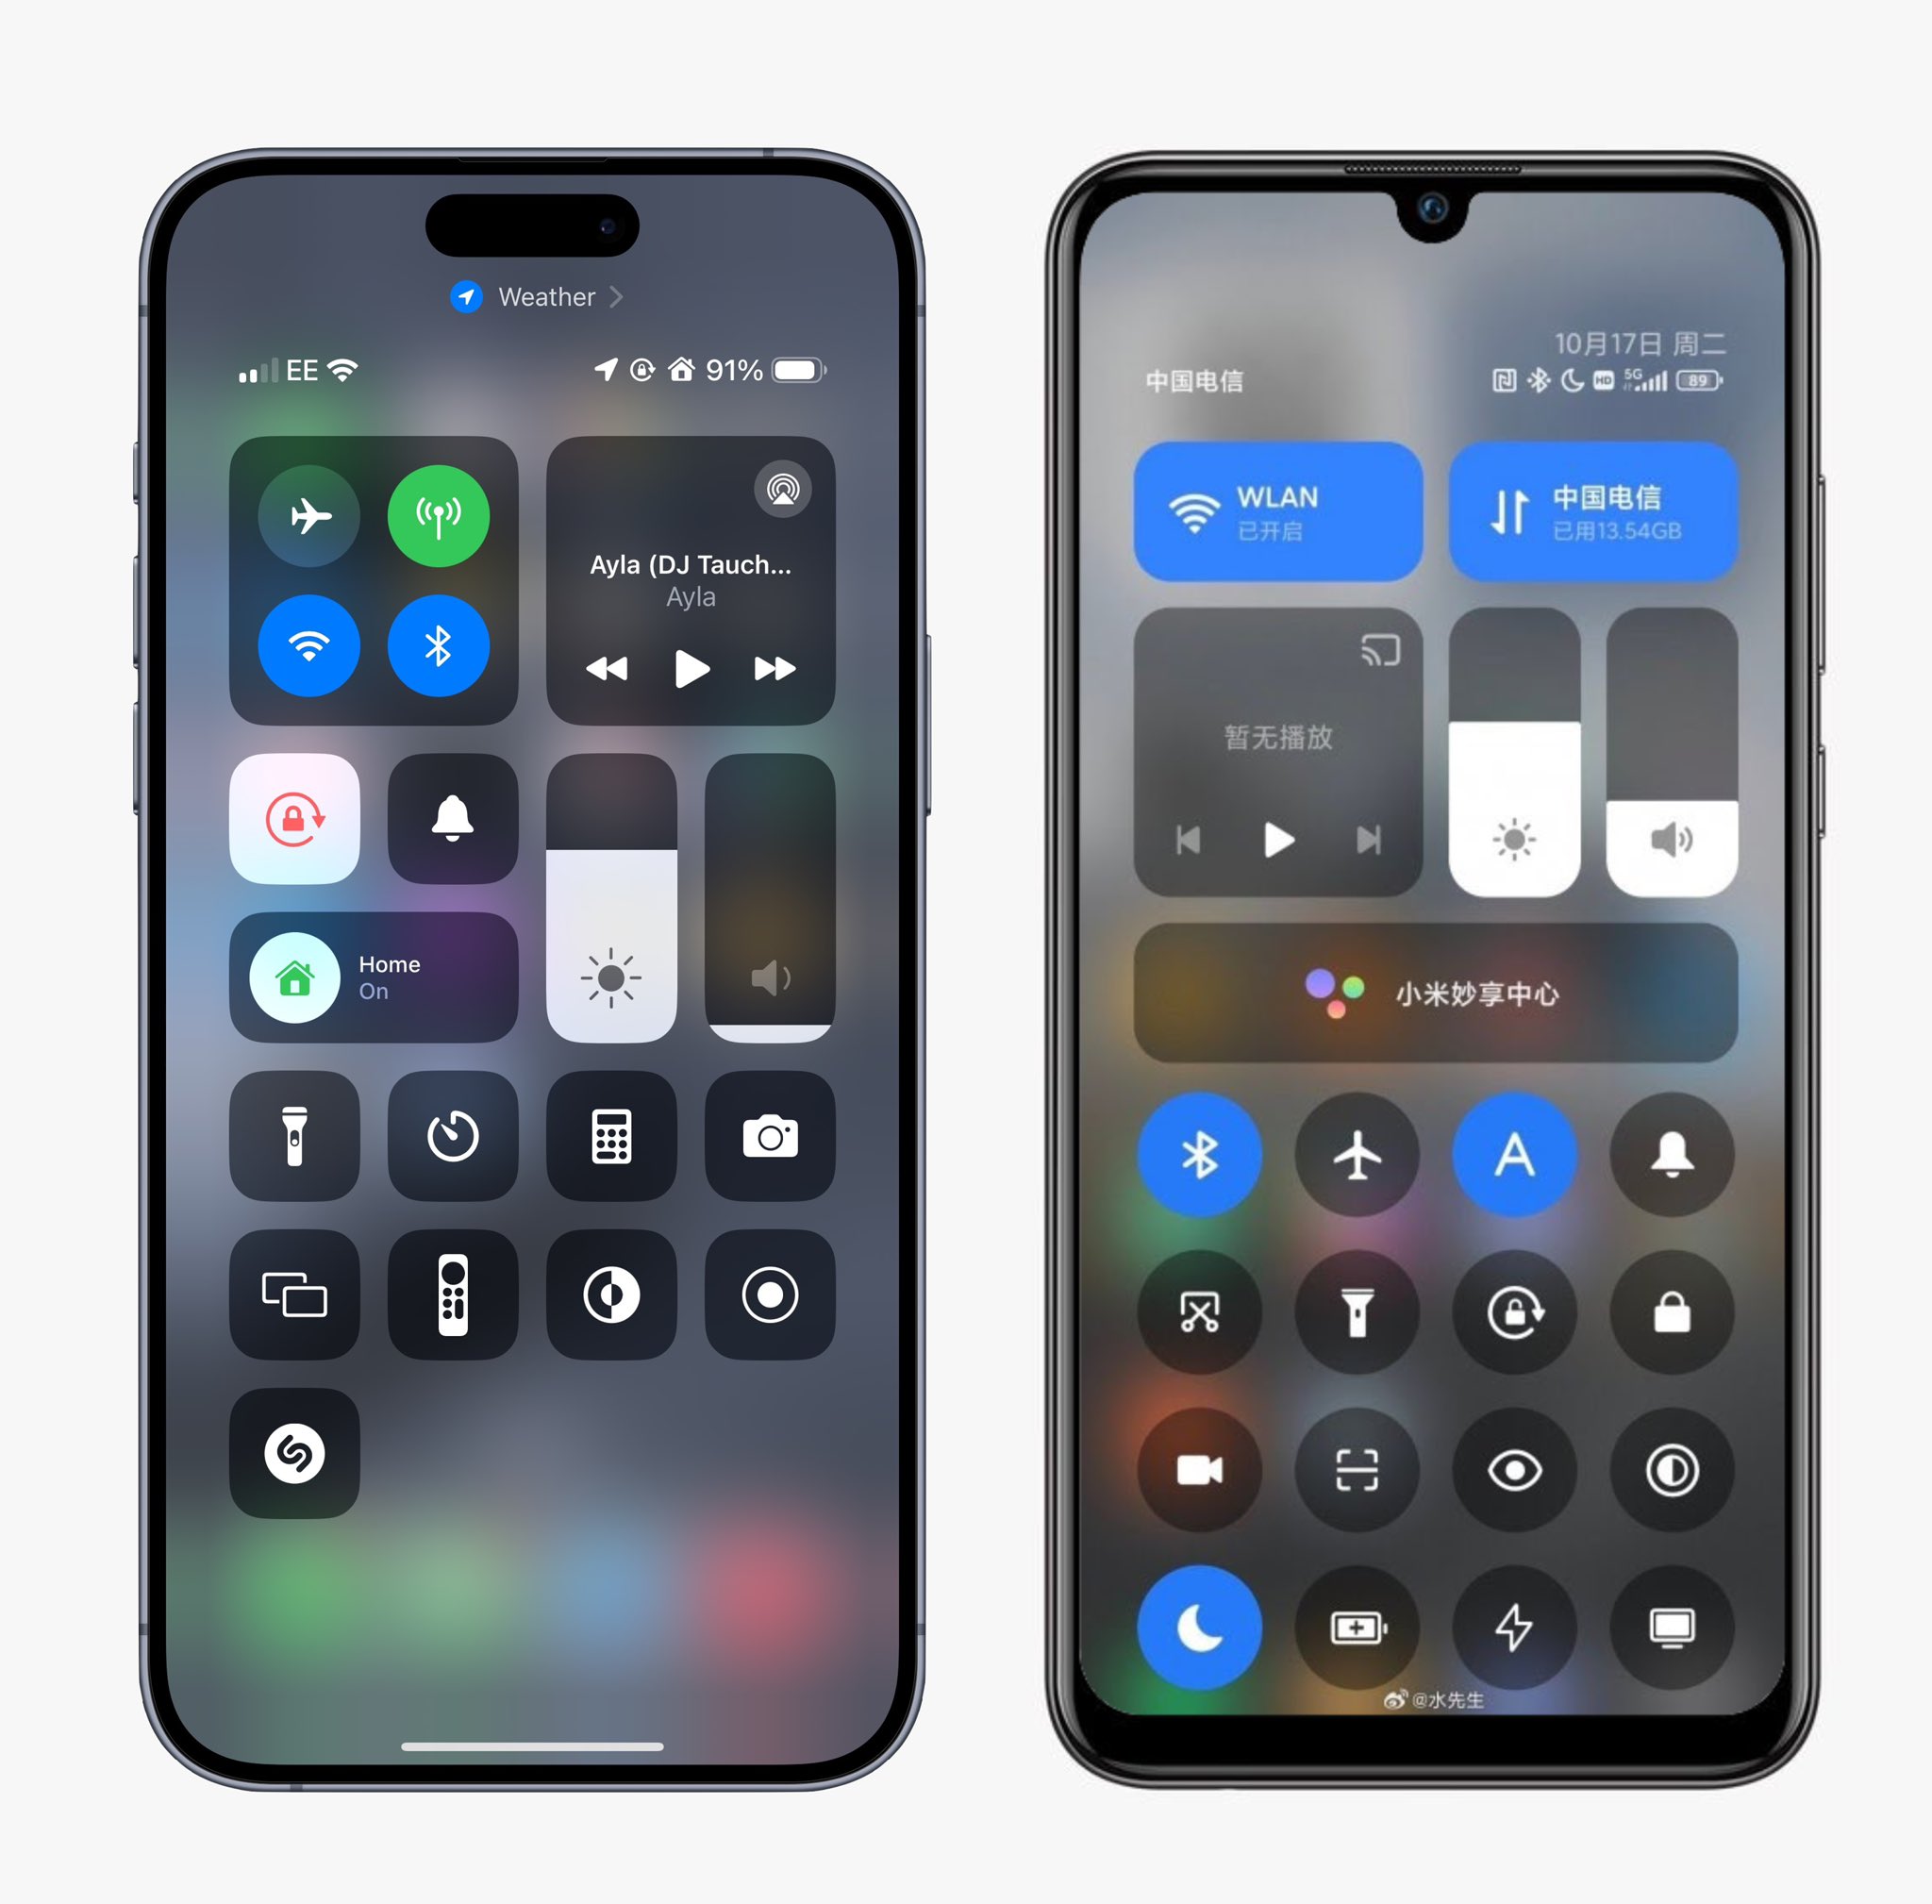 Apple Intro on X: "Xiaomi has copied the iOS Control Center in their new  Android 'Hyper OS' 😭 https://t.co/4Z4sTdtAEu" / X